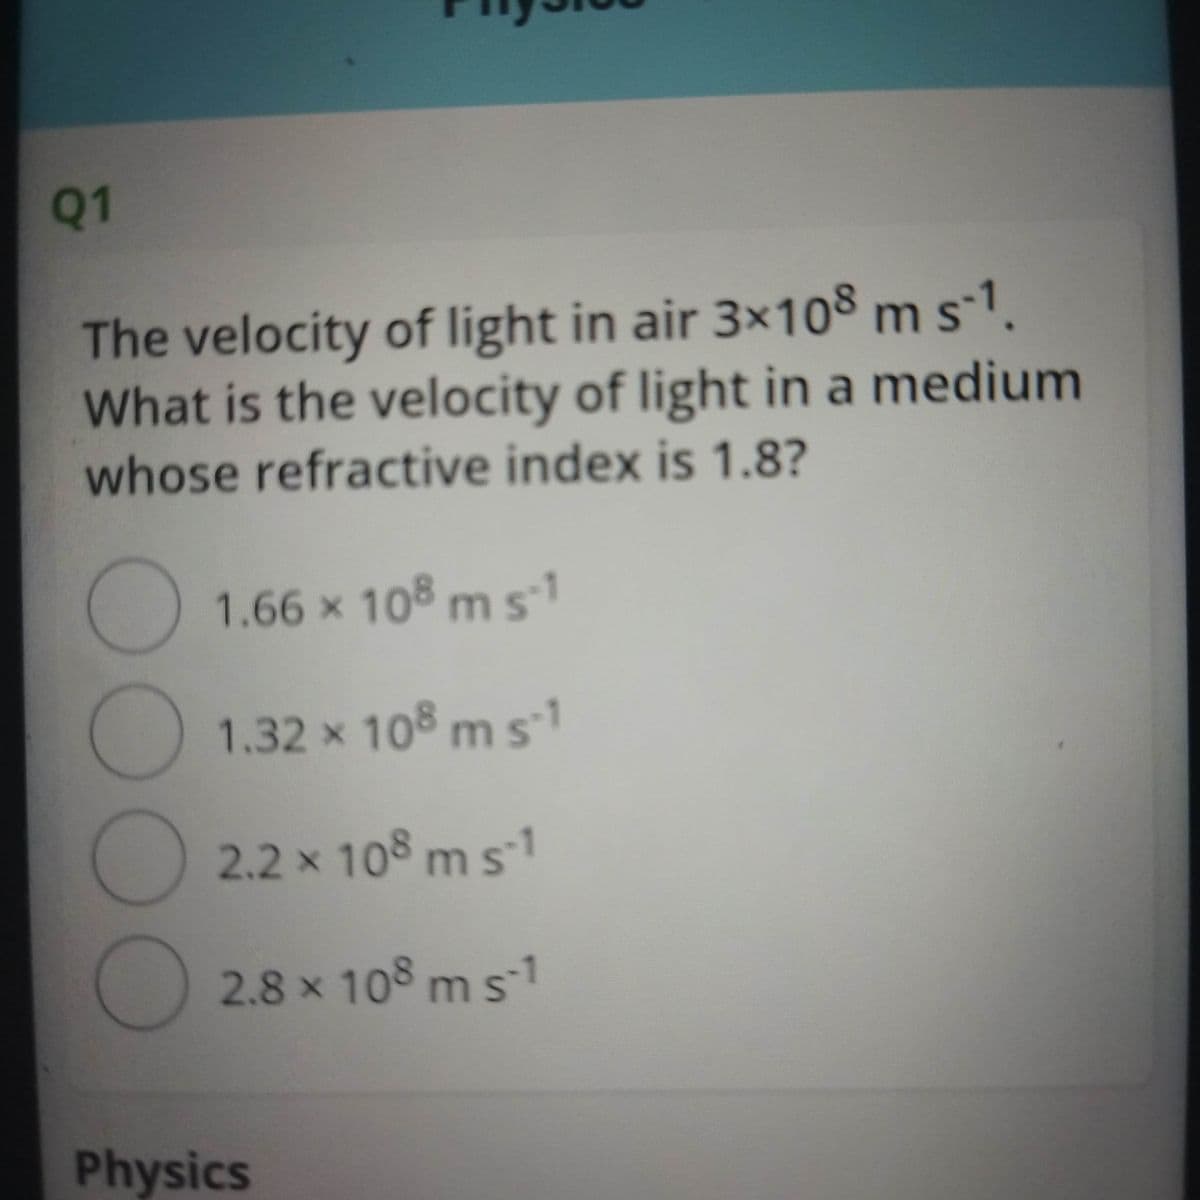 Q1
The velocity of light in air 3×108 m s-1.
What is the velocity of light in a medium
whose refractive index is 1.8?
1.66 x 108 ms1
1.32 x 108 m s1
2.2 x 108 ms1
2.8 x 108 m s1
Physics
00
